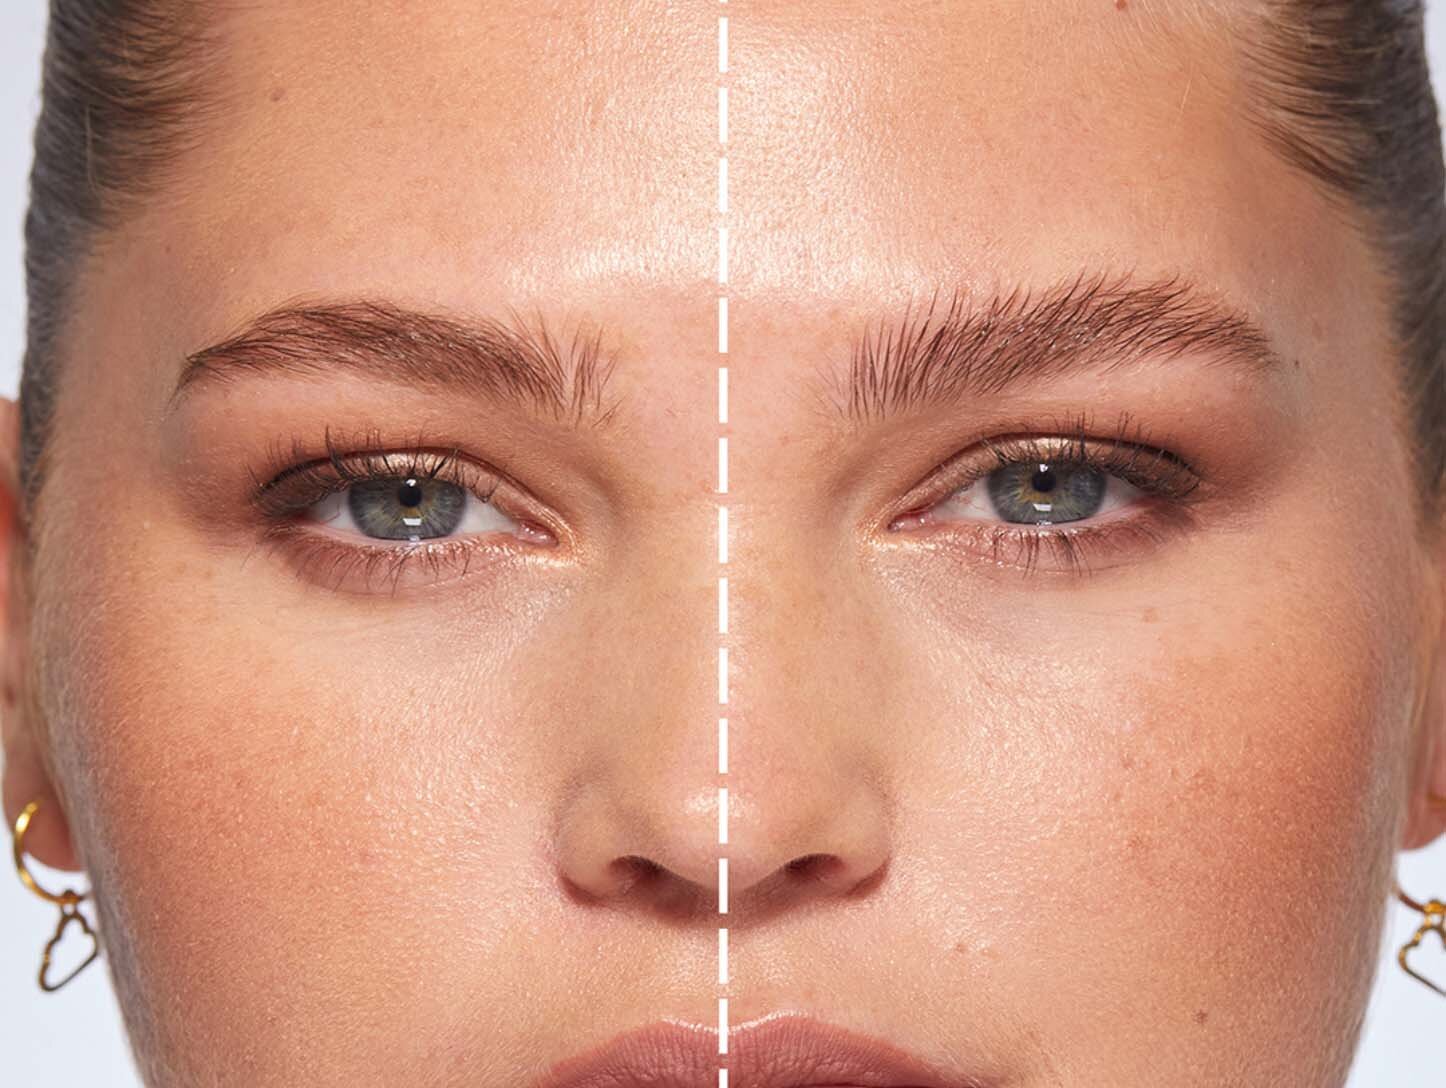 before and after brows with brow glue